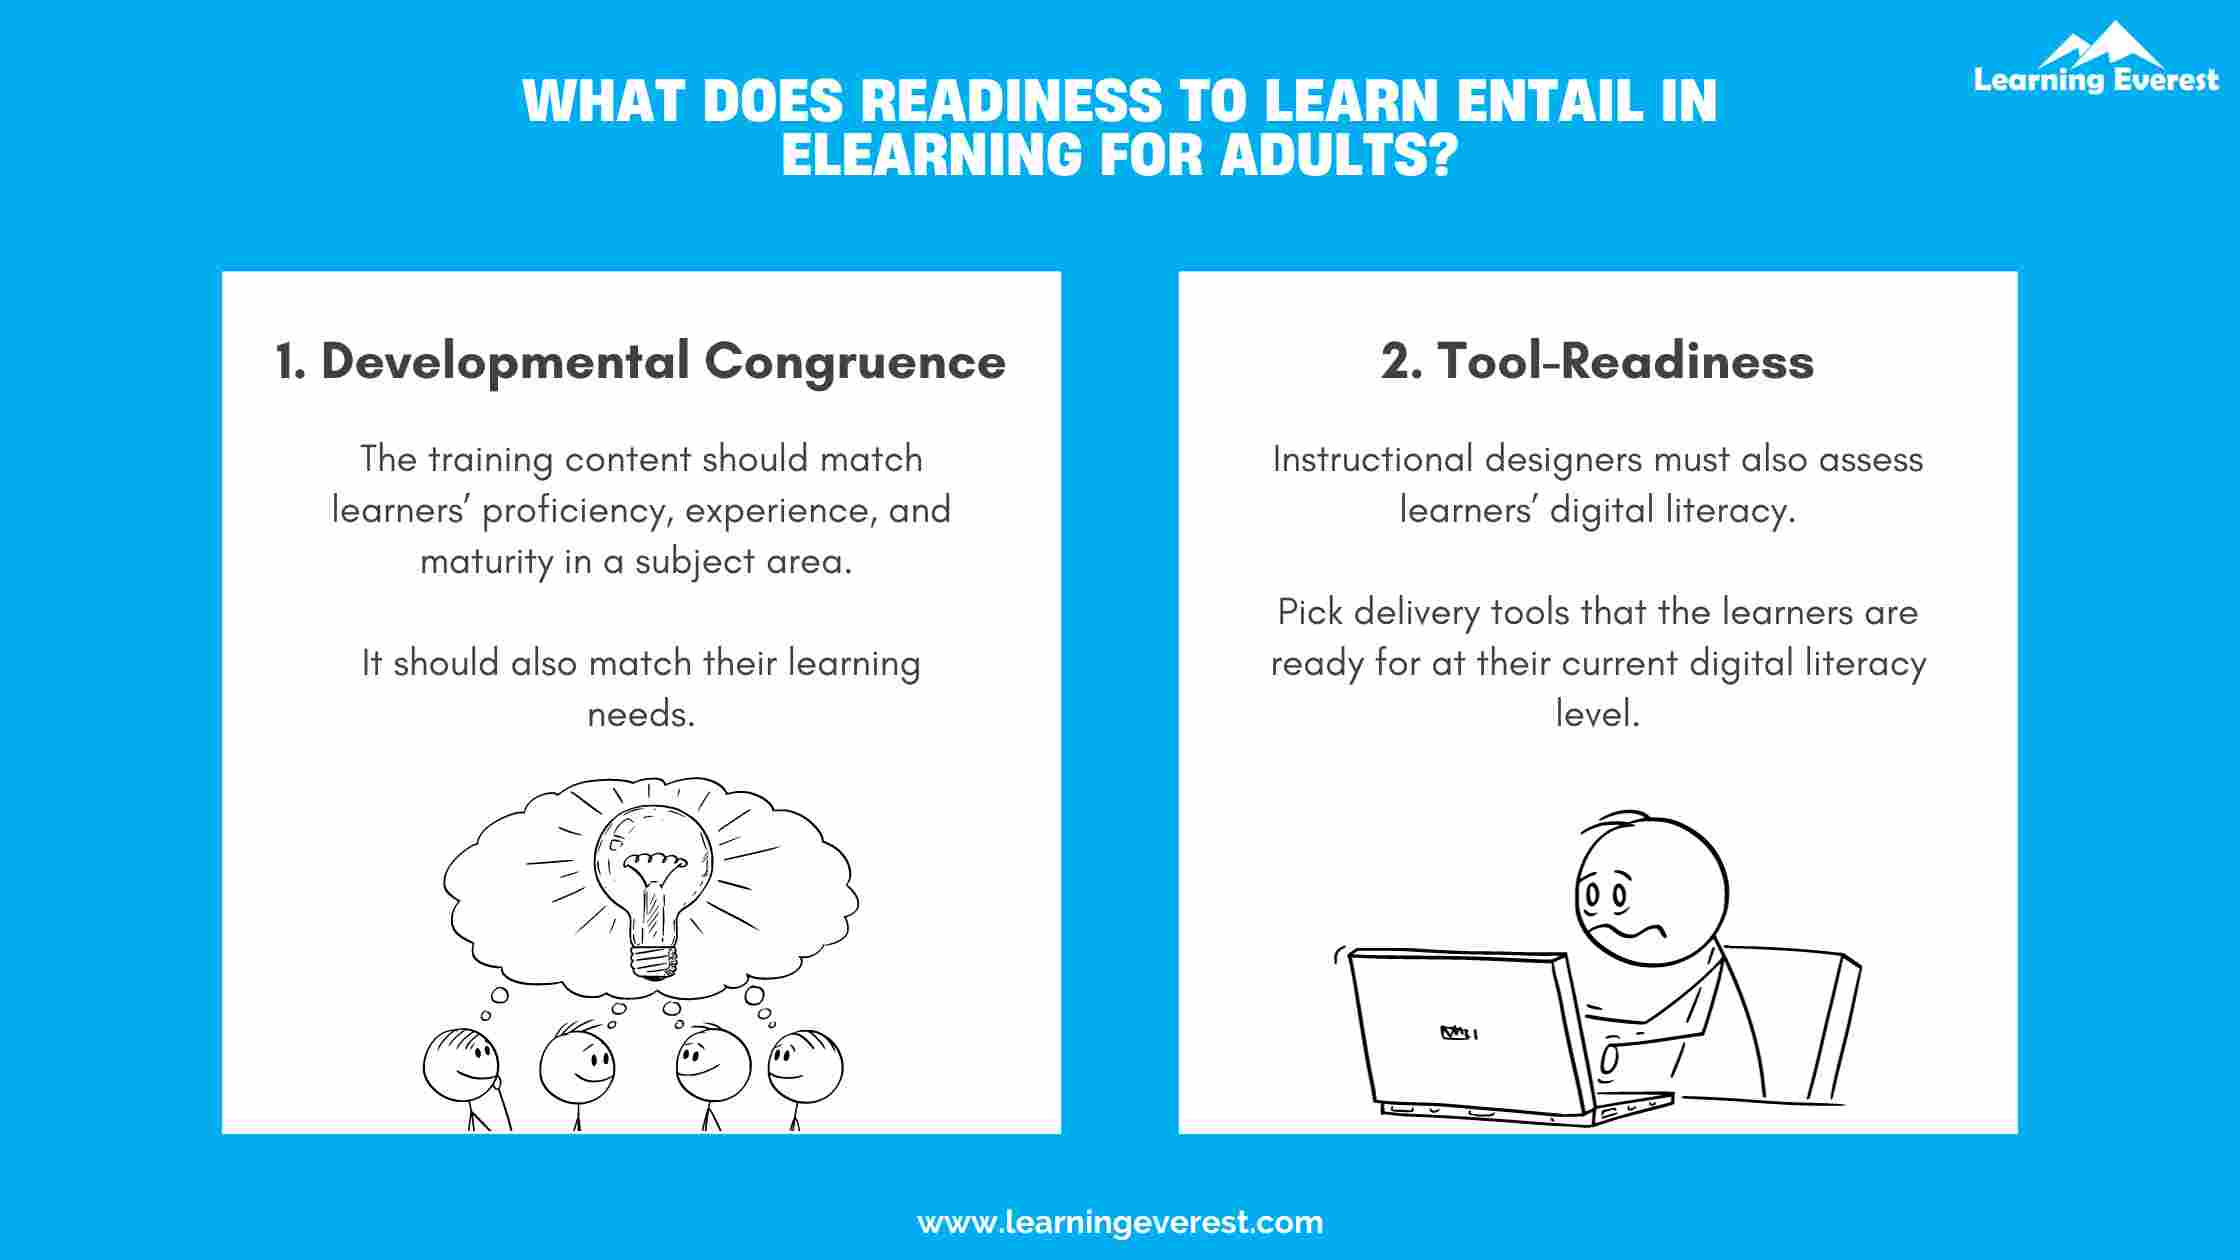 What Does Readiness to Learn Entail in Adult eLearning